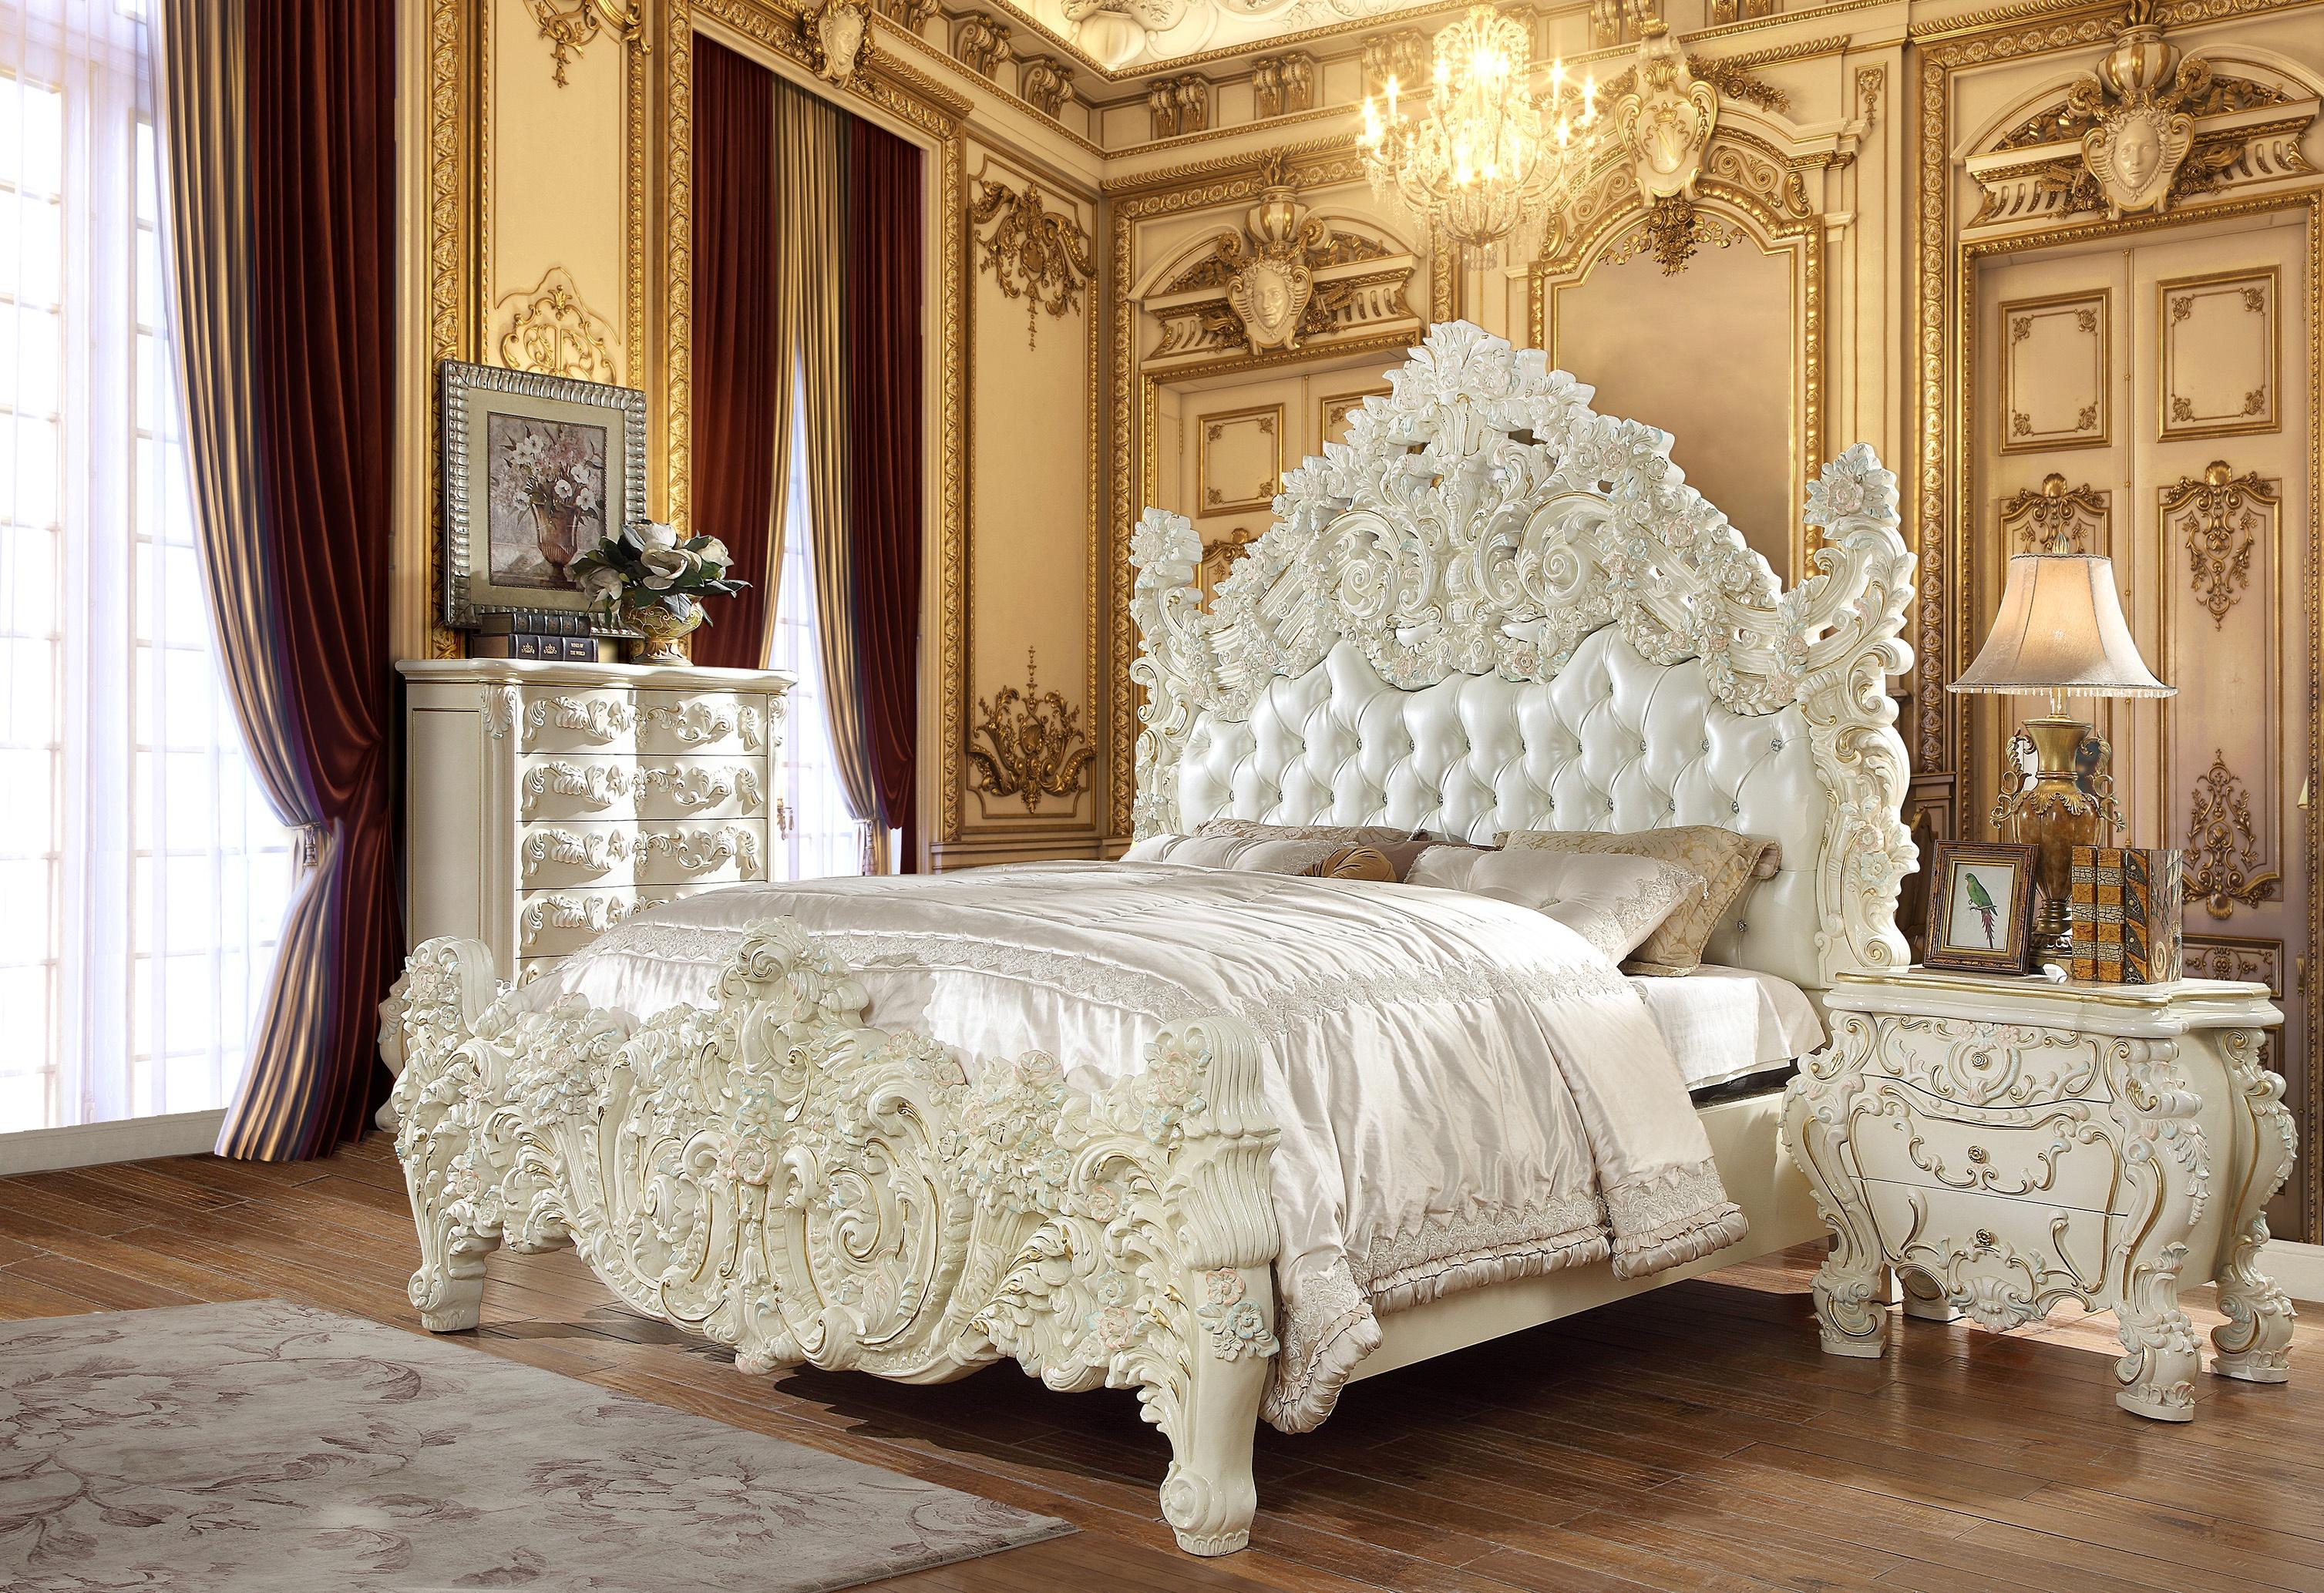 

    
Luxury Glossy White King Bedroom Set 6Pcs Carved Wood Homey Design HD-8089
